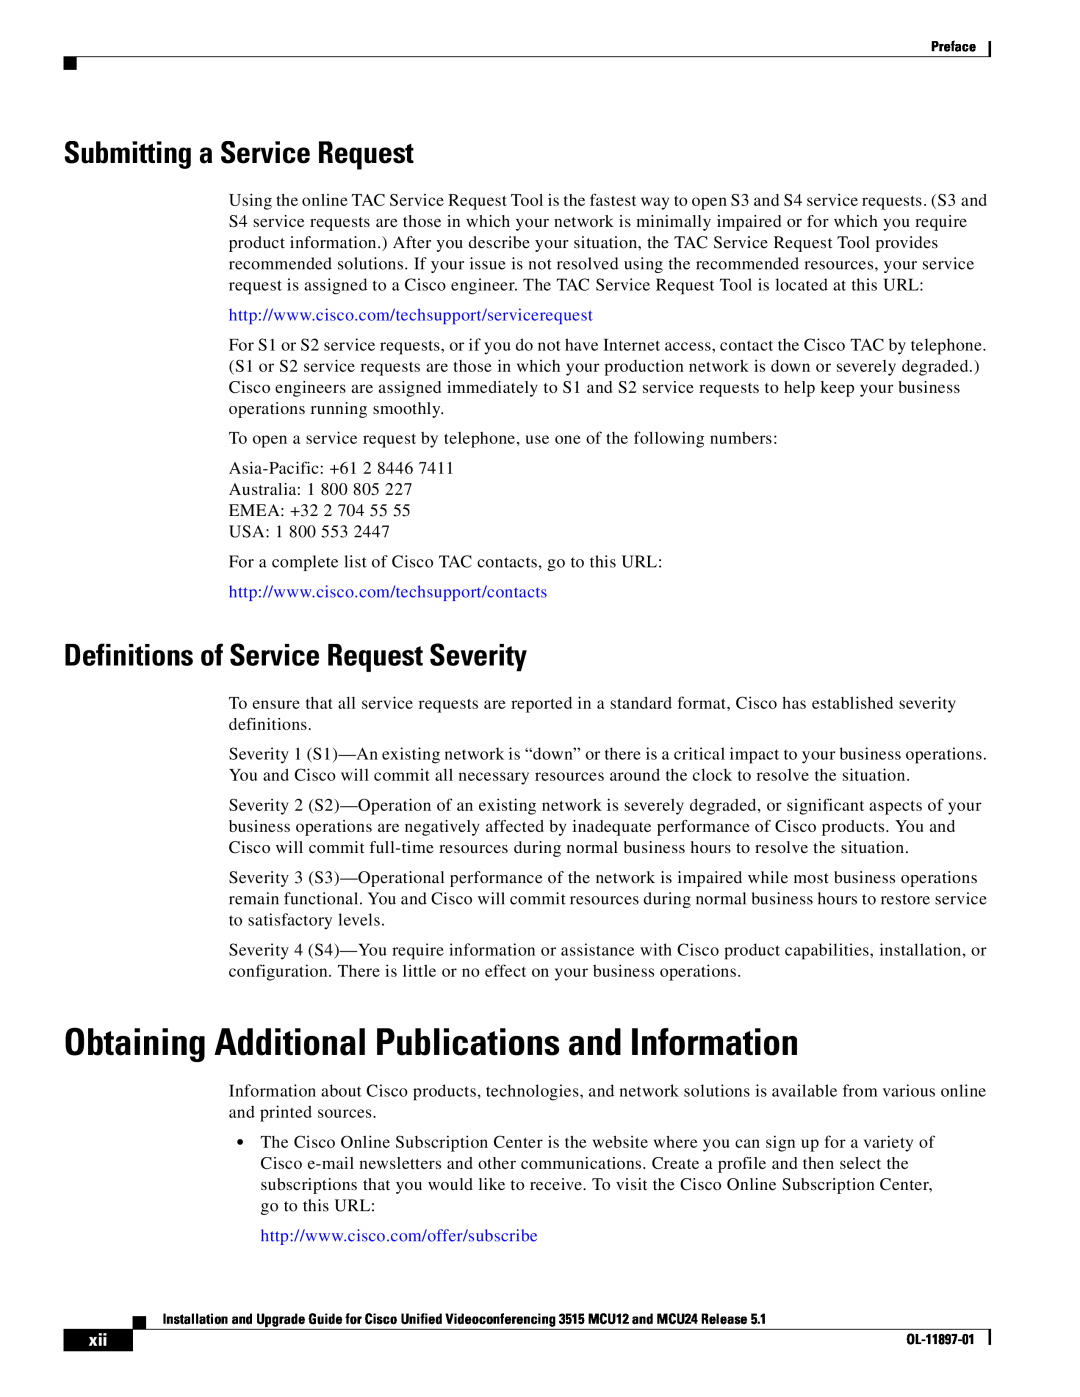 Cisco Systems MCU24 manual Obtaining Additional Publications and Information, Submitting a Service Request 